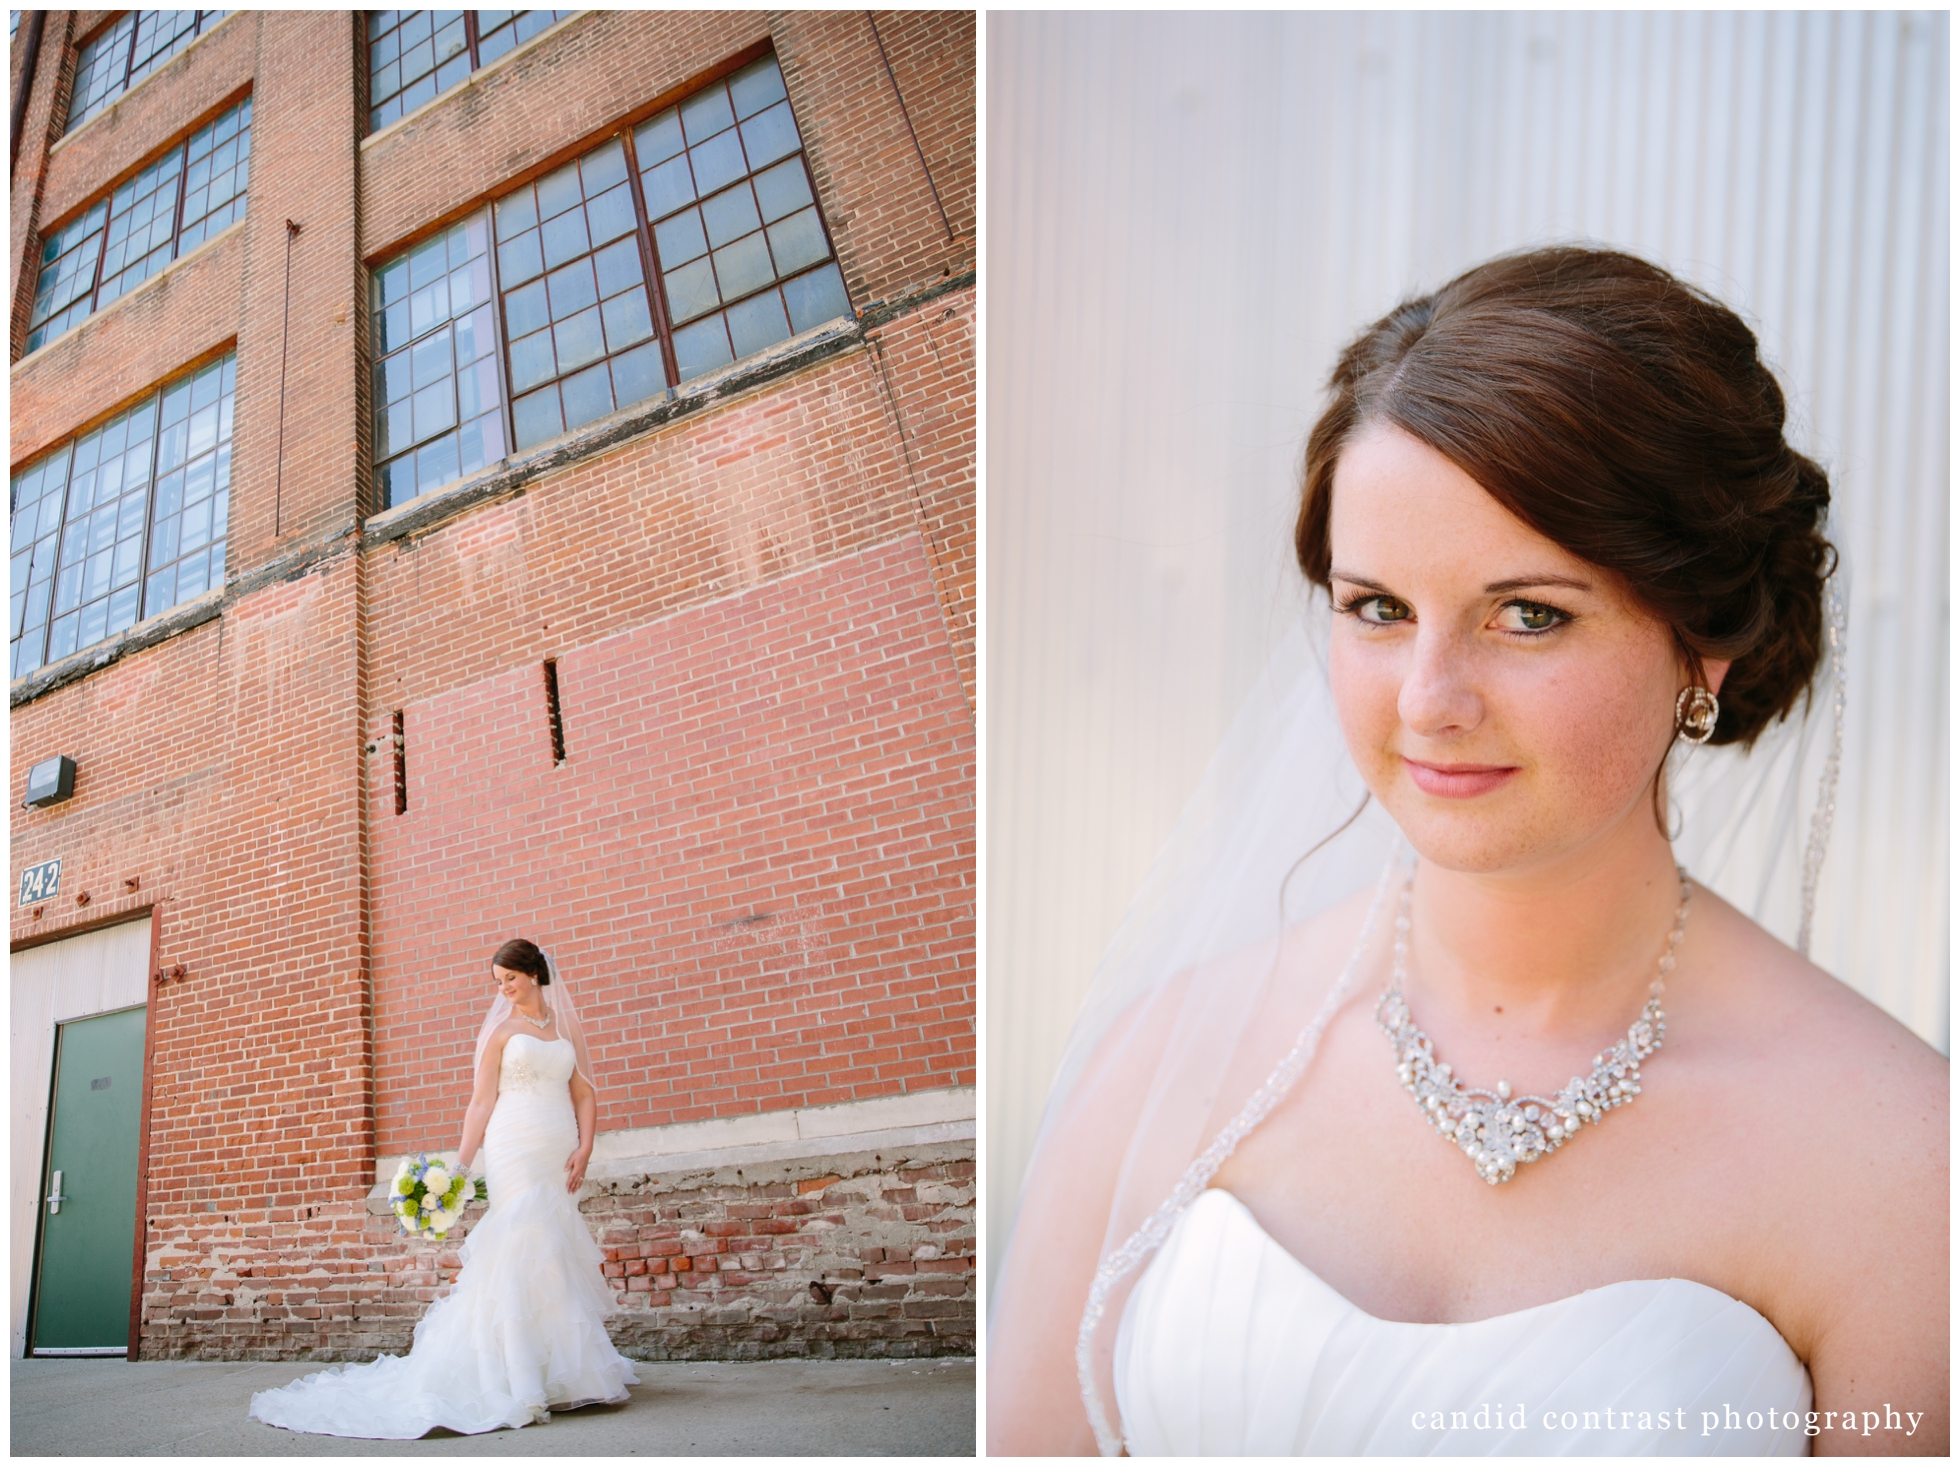 classically beautiful bridal style for Dubuque iowa wedding, candid contrast photography